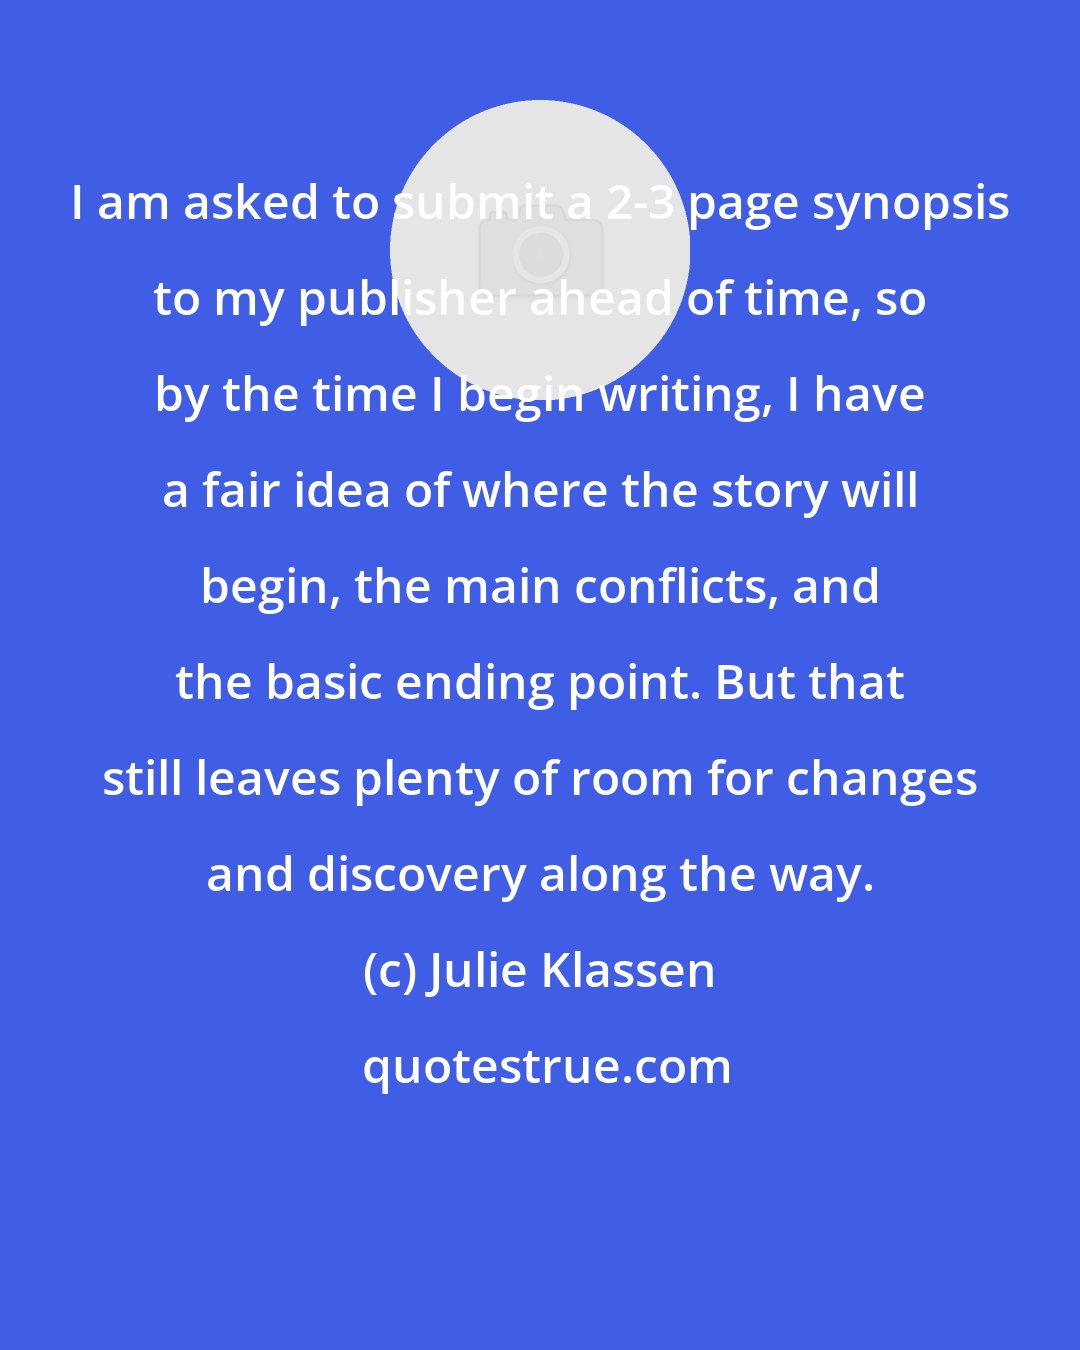 Julie Klassen: I am asked to submit a 2-3 page synopsis to my publisher ahead of time, so by the time I begin writing, I have a fair idea of where the story will begin, the main conflicts, and the basic ending point. But that still leaves plenty of room for changes and discovery along the way.